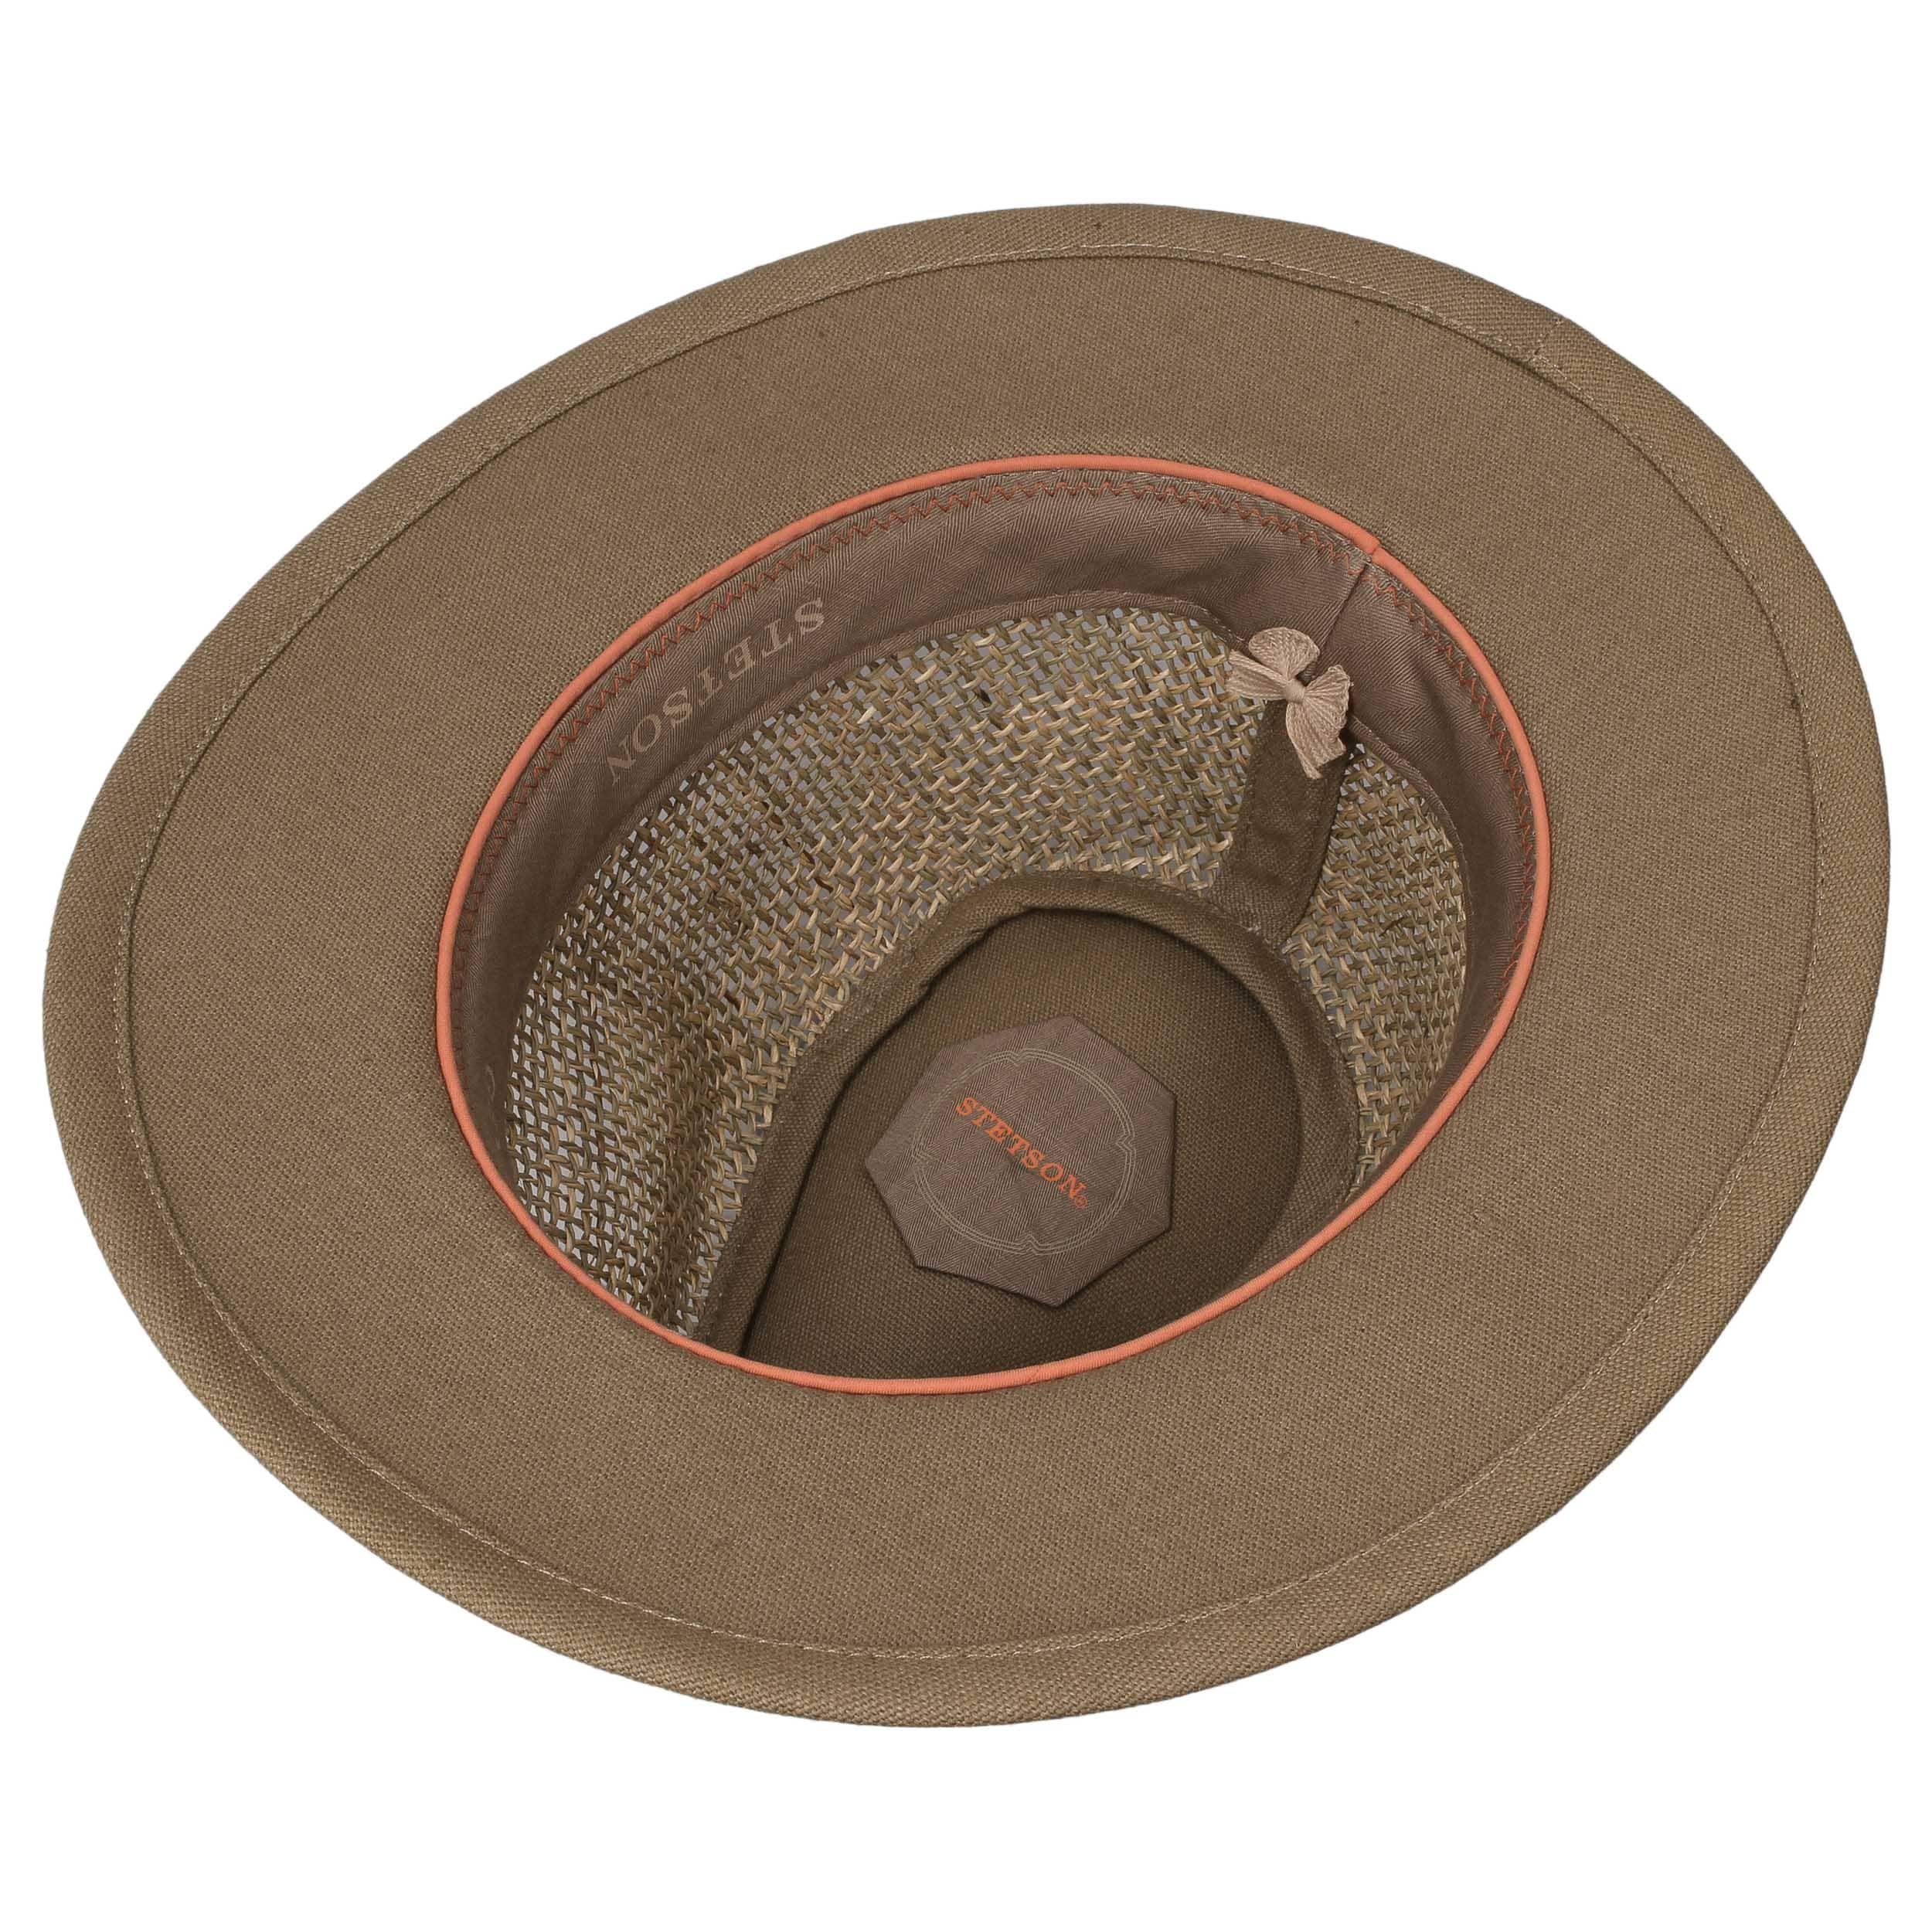 Medfield Seagrass Summer Hat by Stetson - 99,00